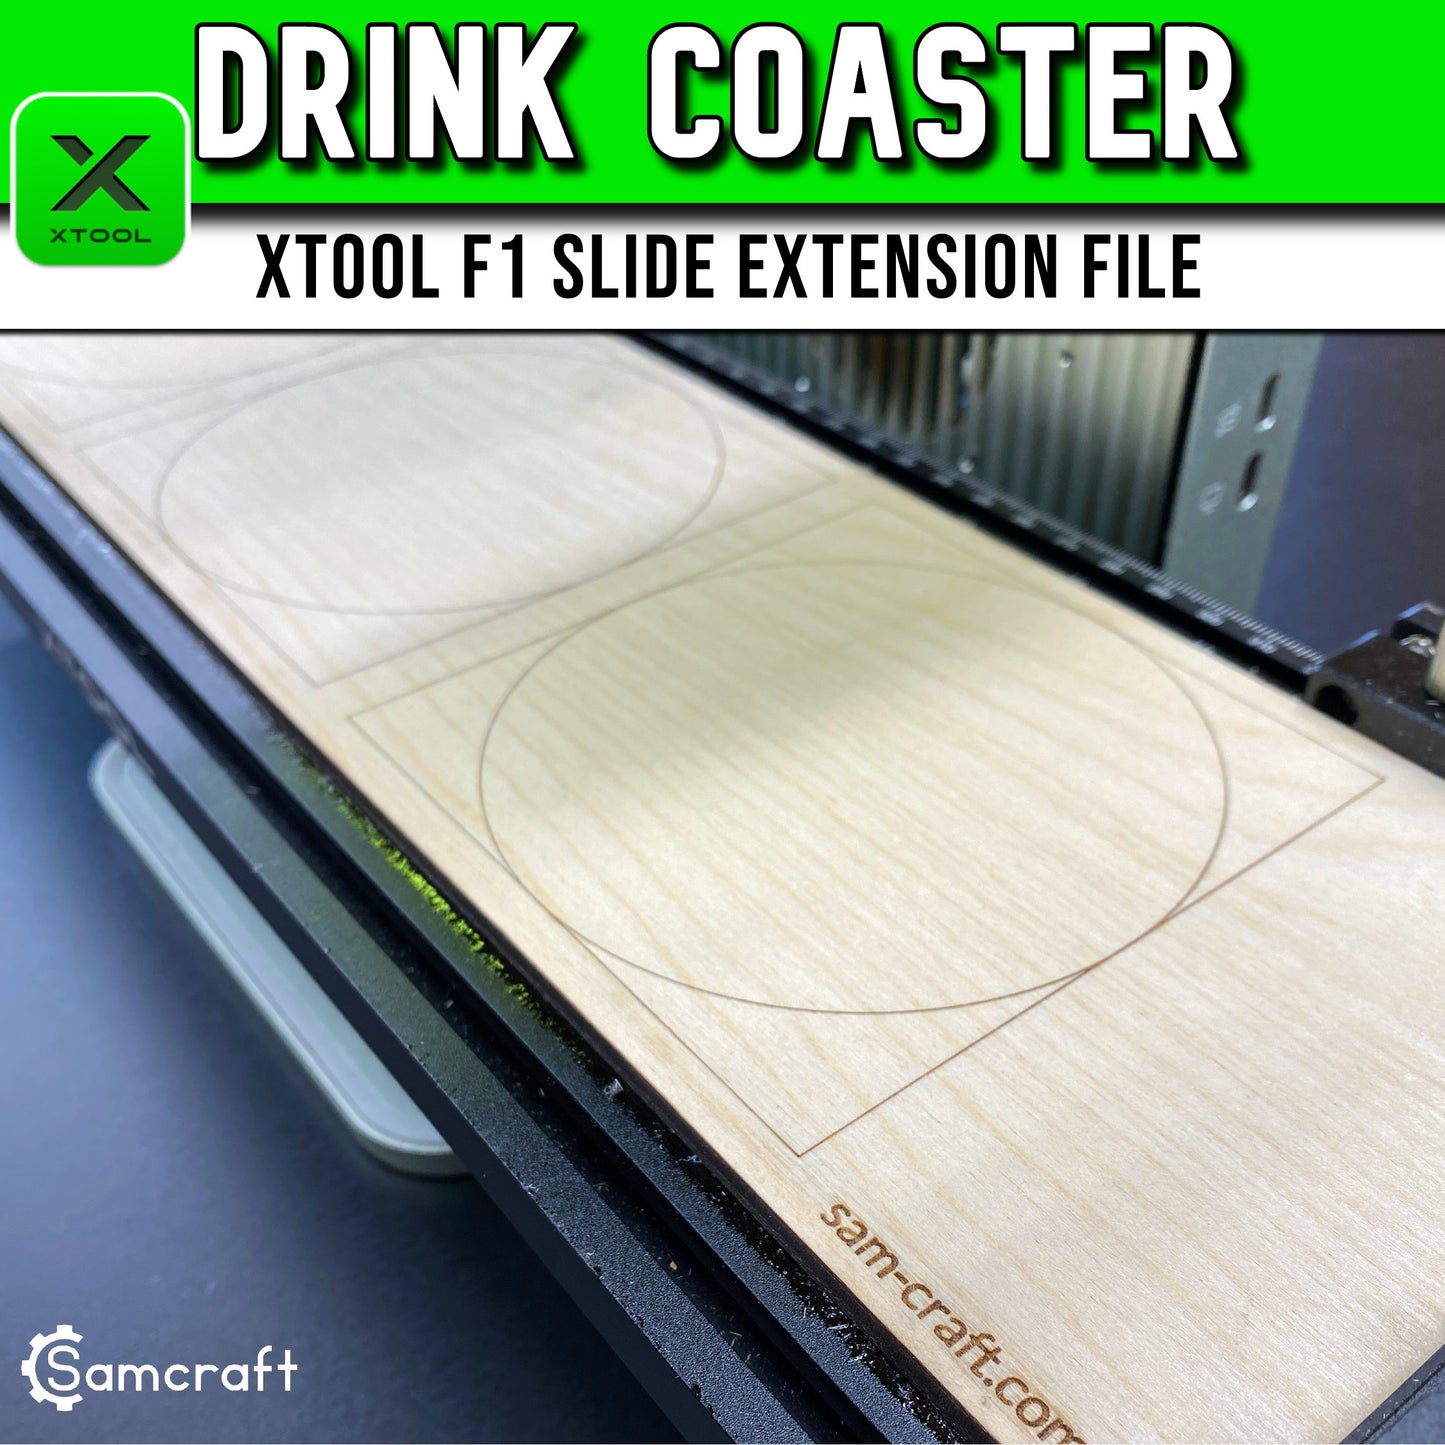 Drink Coaster Template - xTool F1 Slide Extension